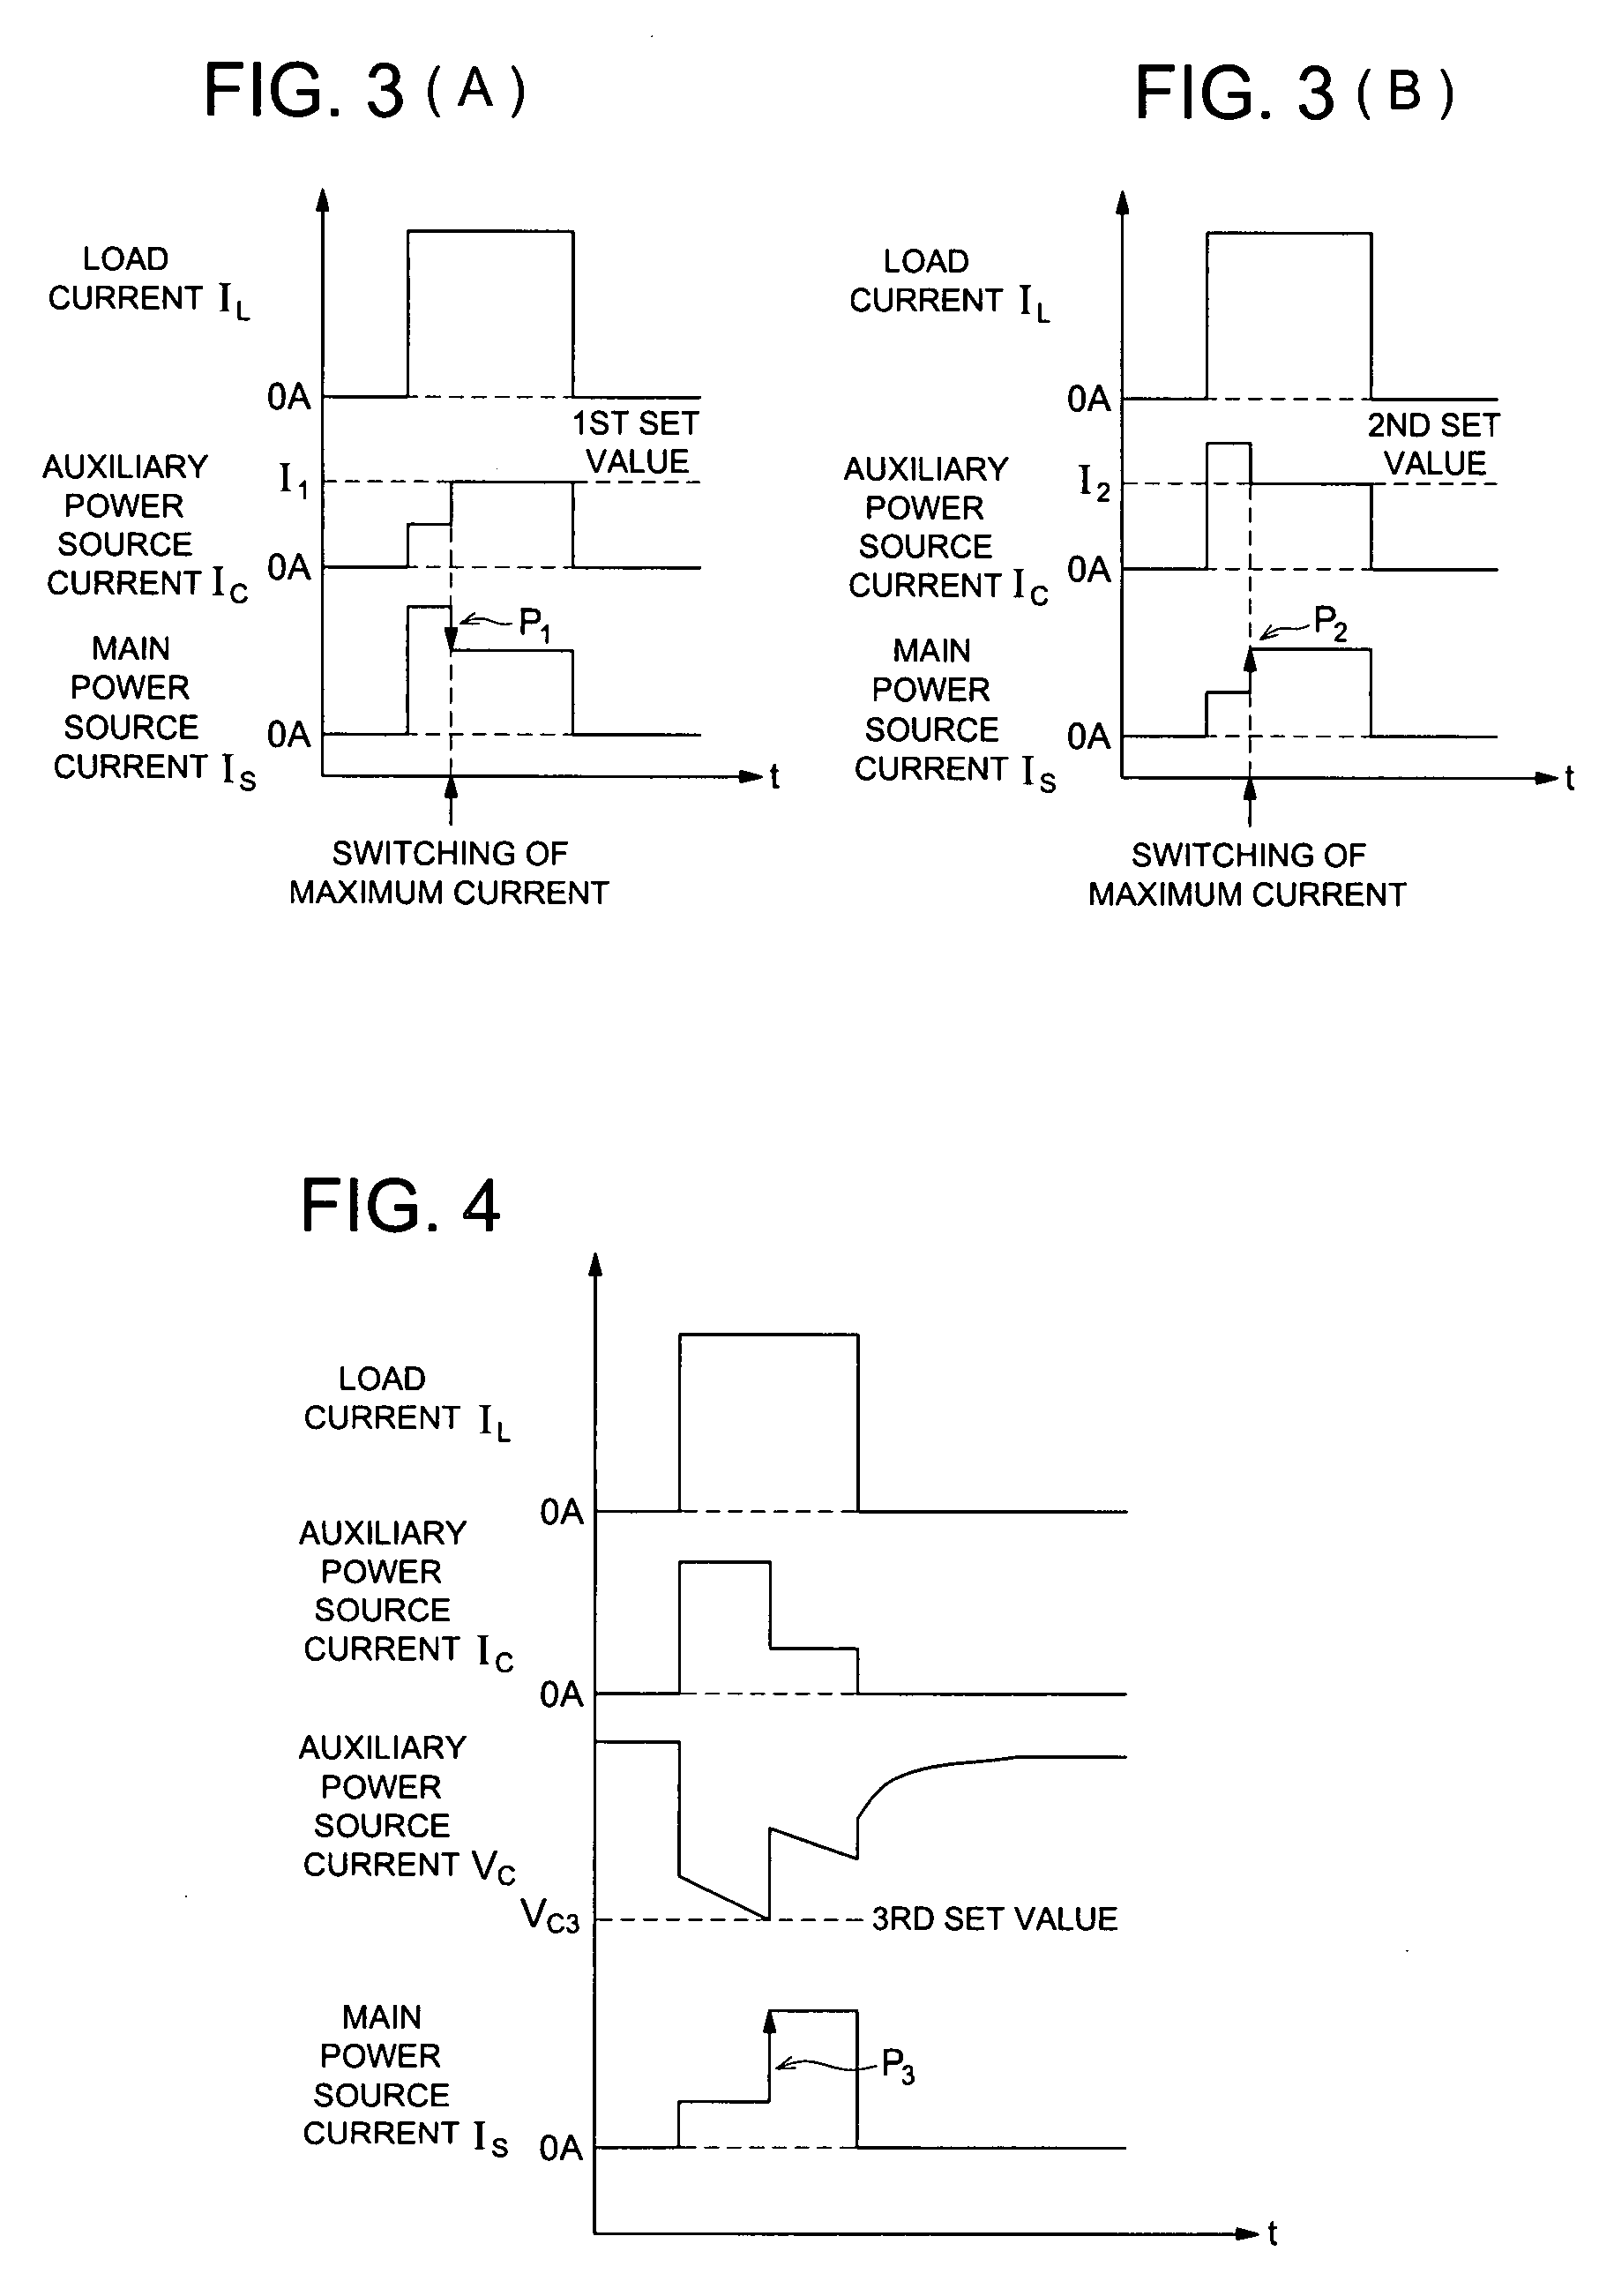 Power unit and image forming system